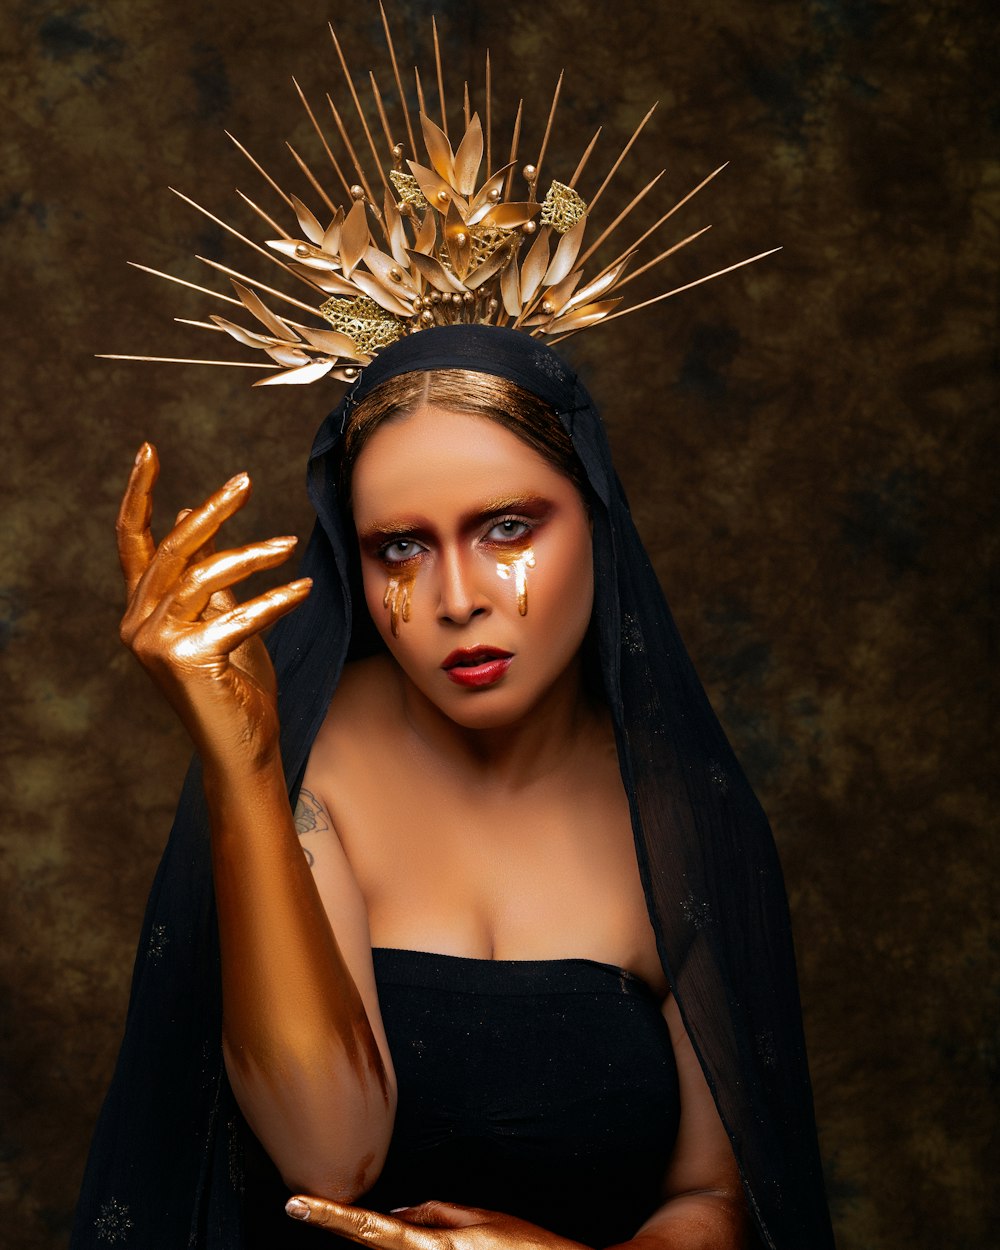 a woman in a black dress with a gold crown on her head